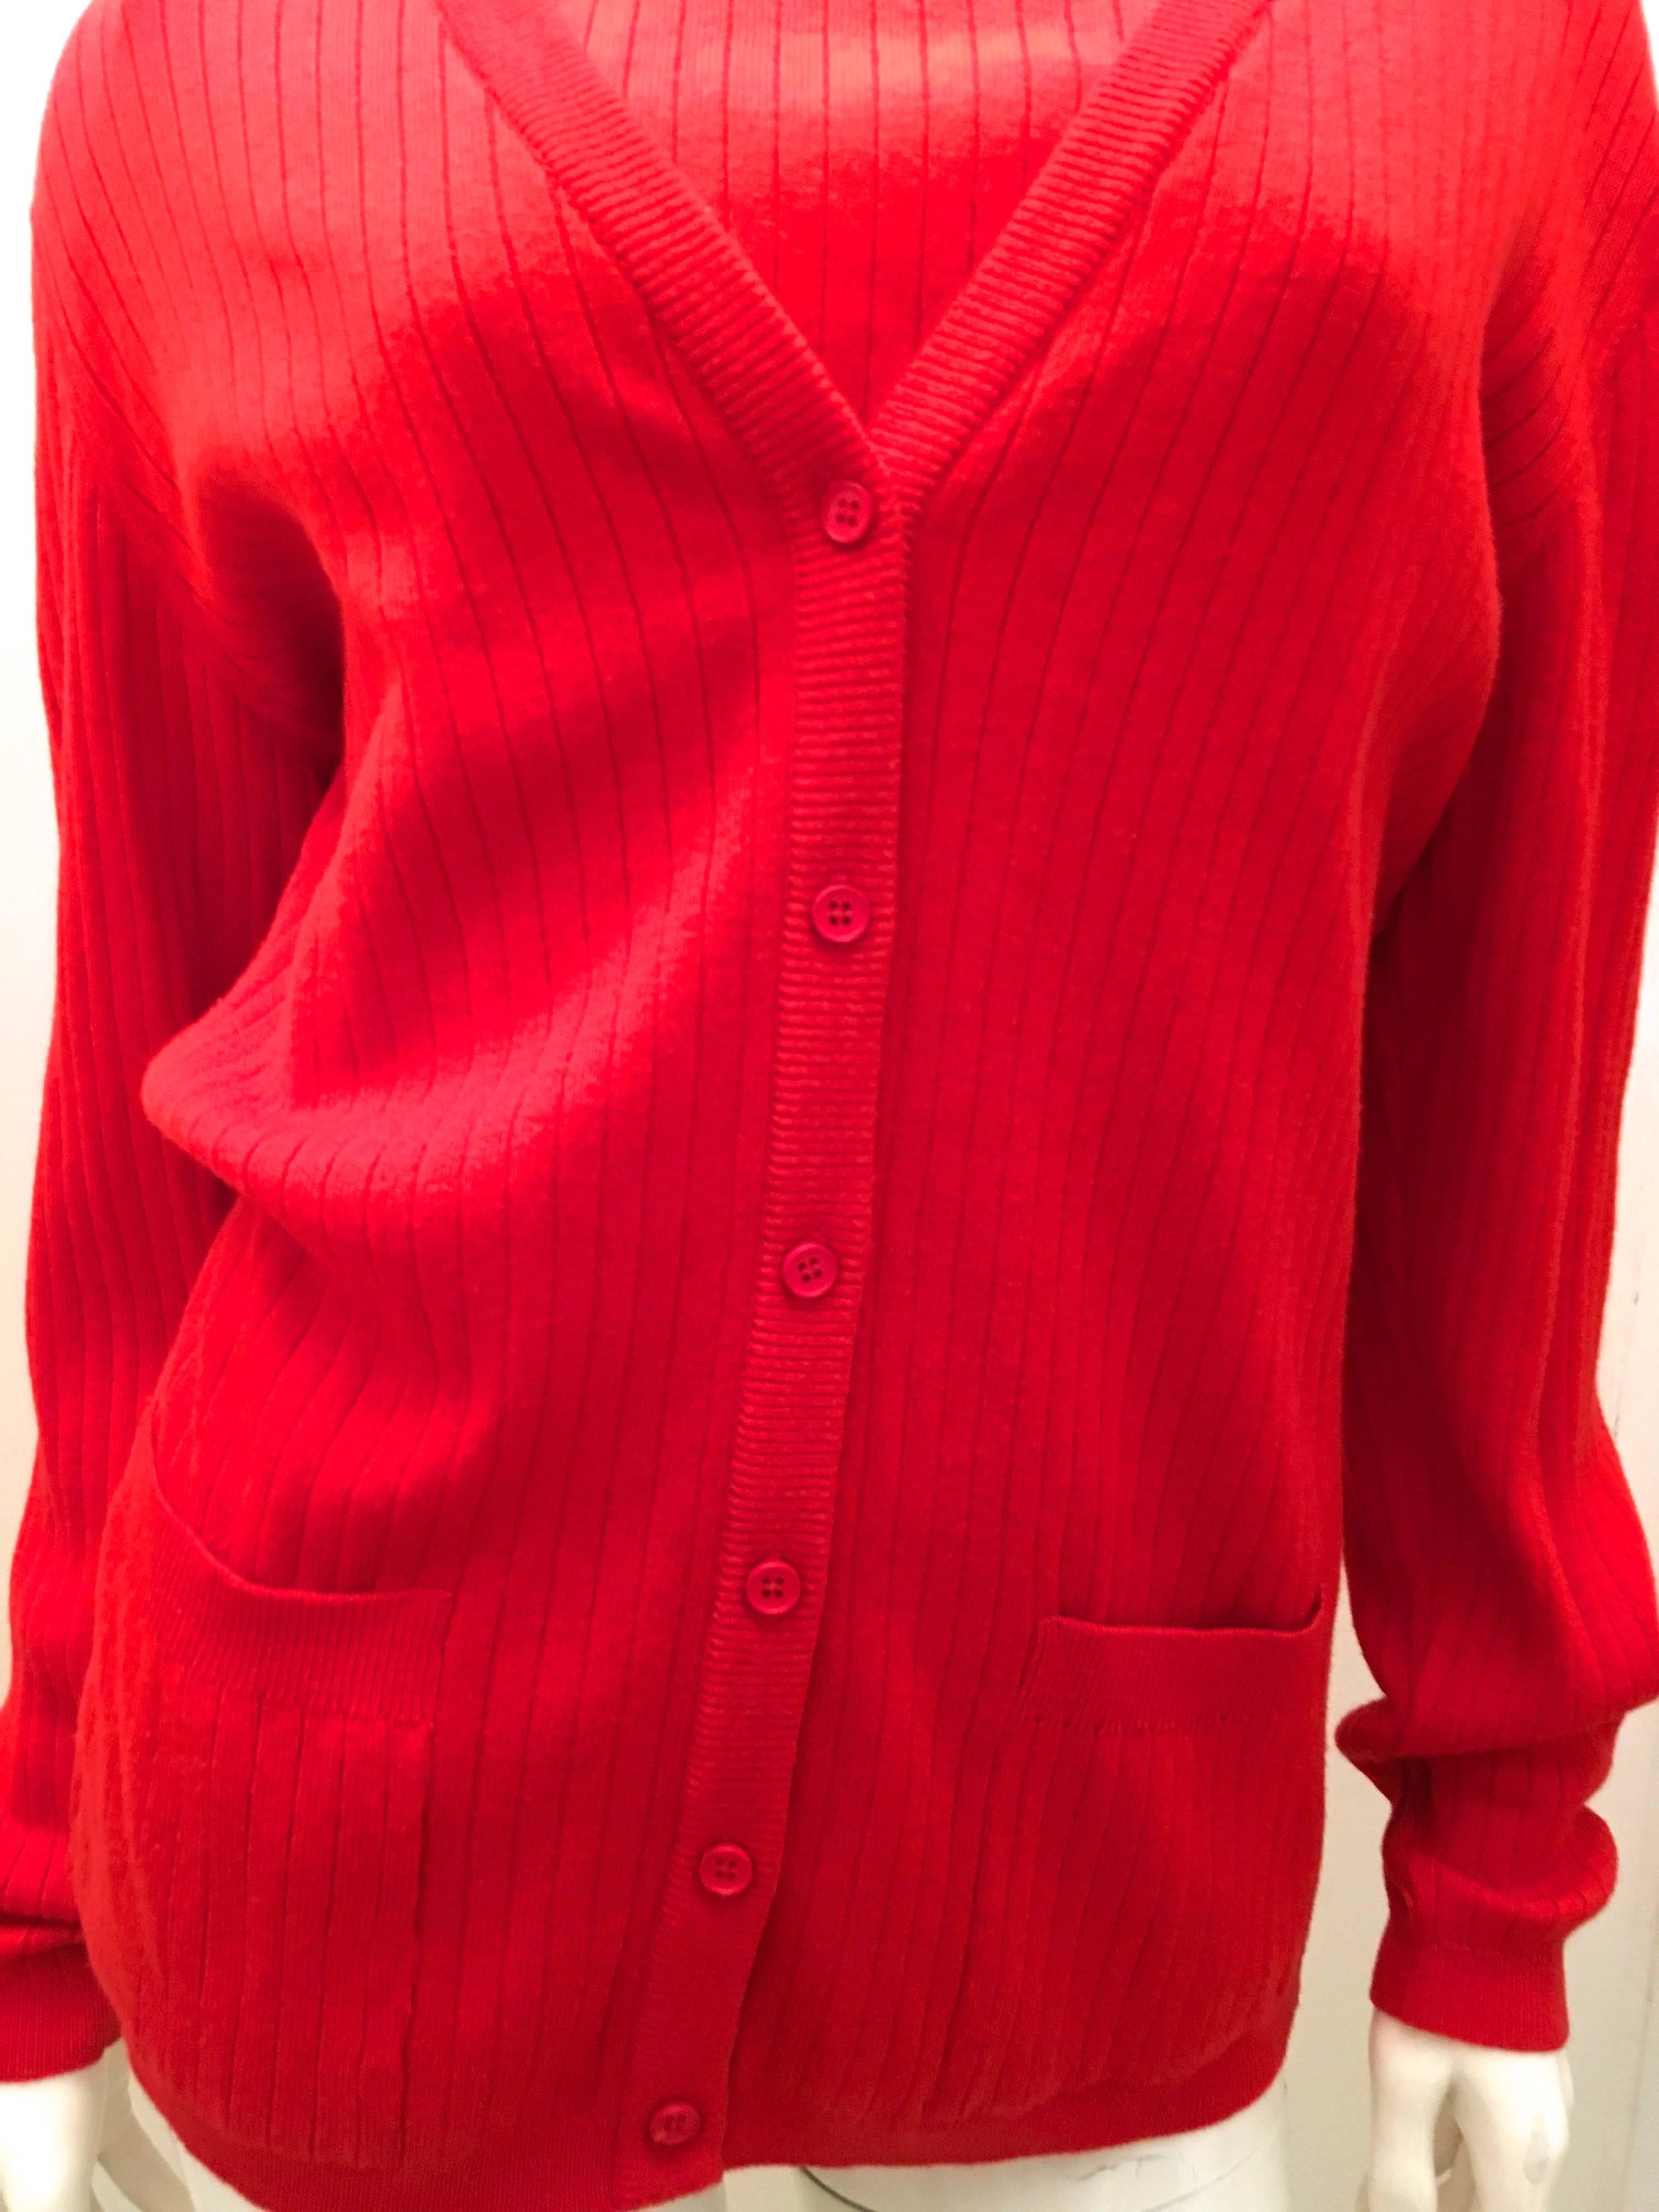 Rare Courreges Red Cardigan Sweater Set - 1970's For Sale 3